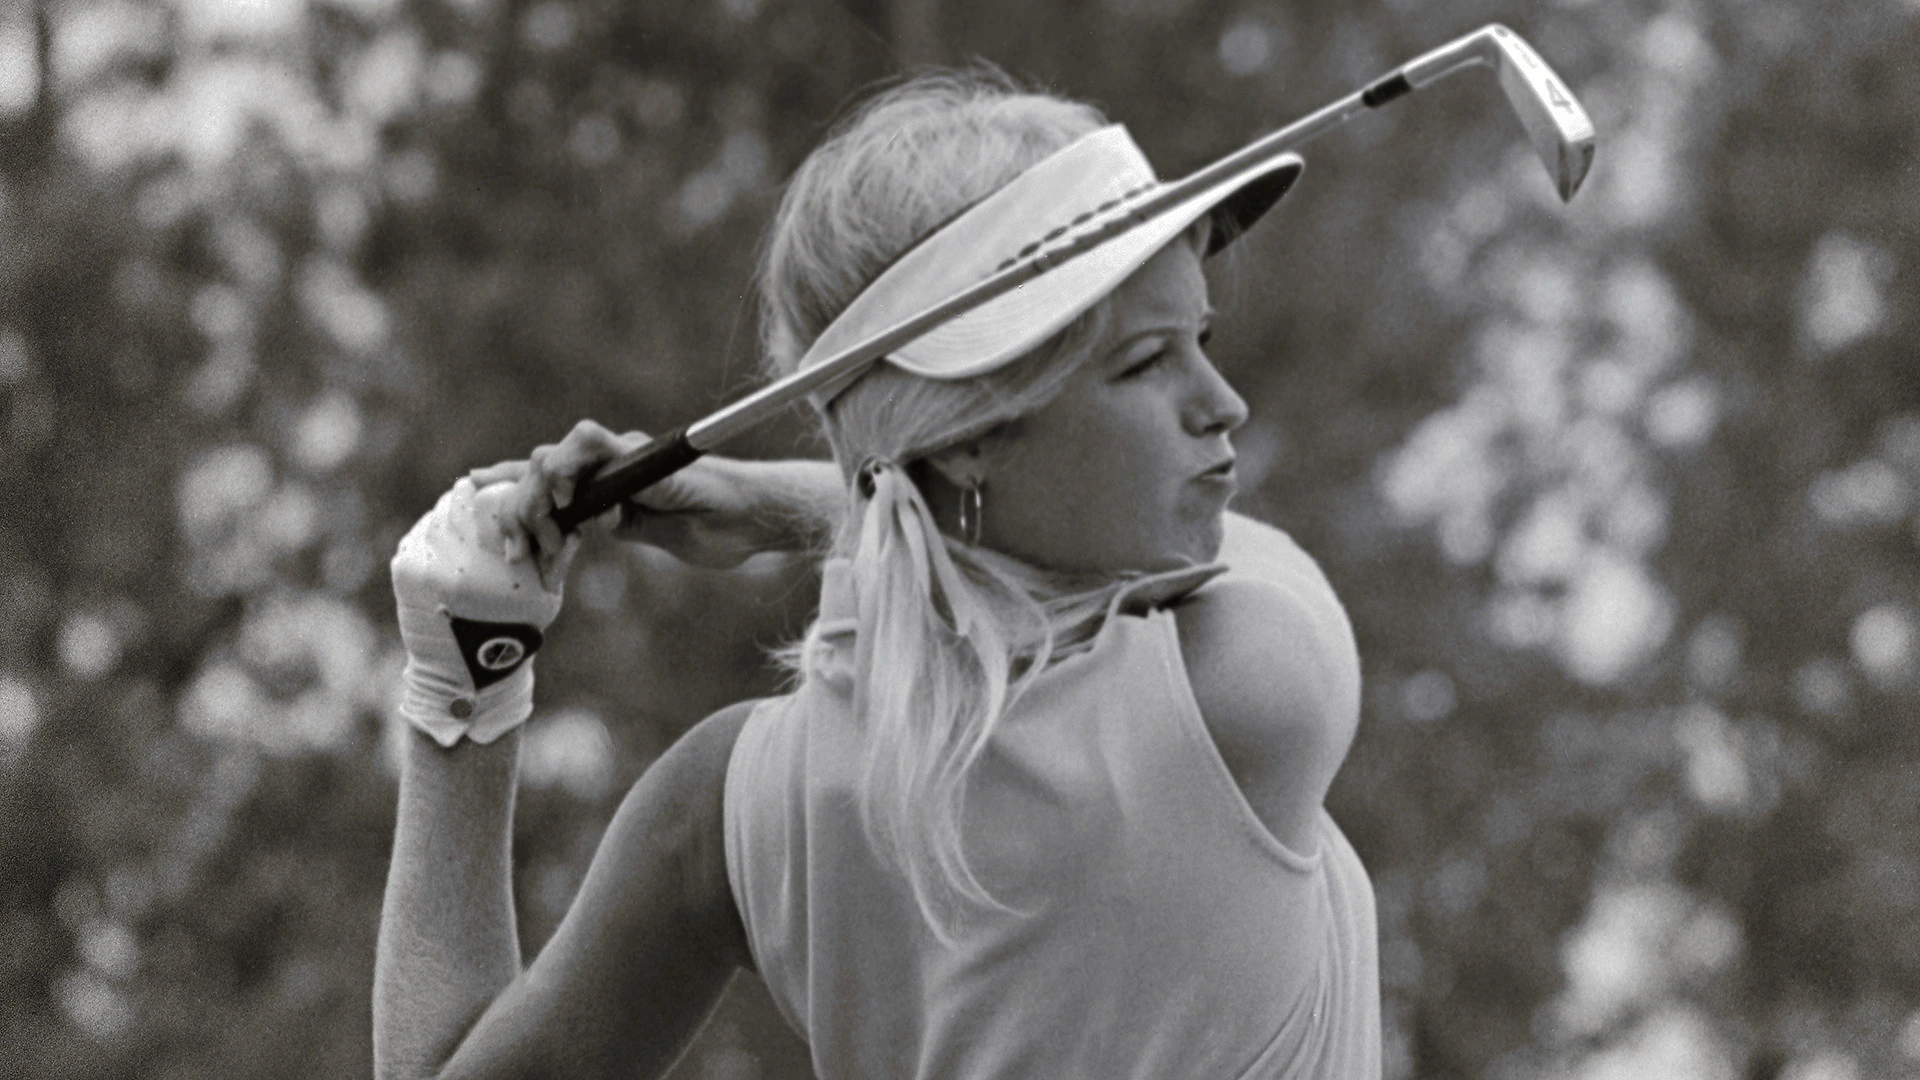 Baugh used popularity to pioneer LPGA at young age